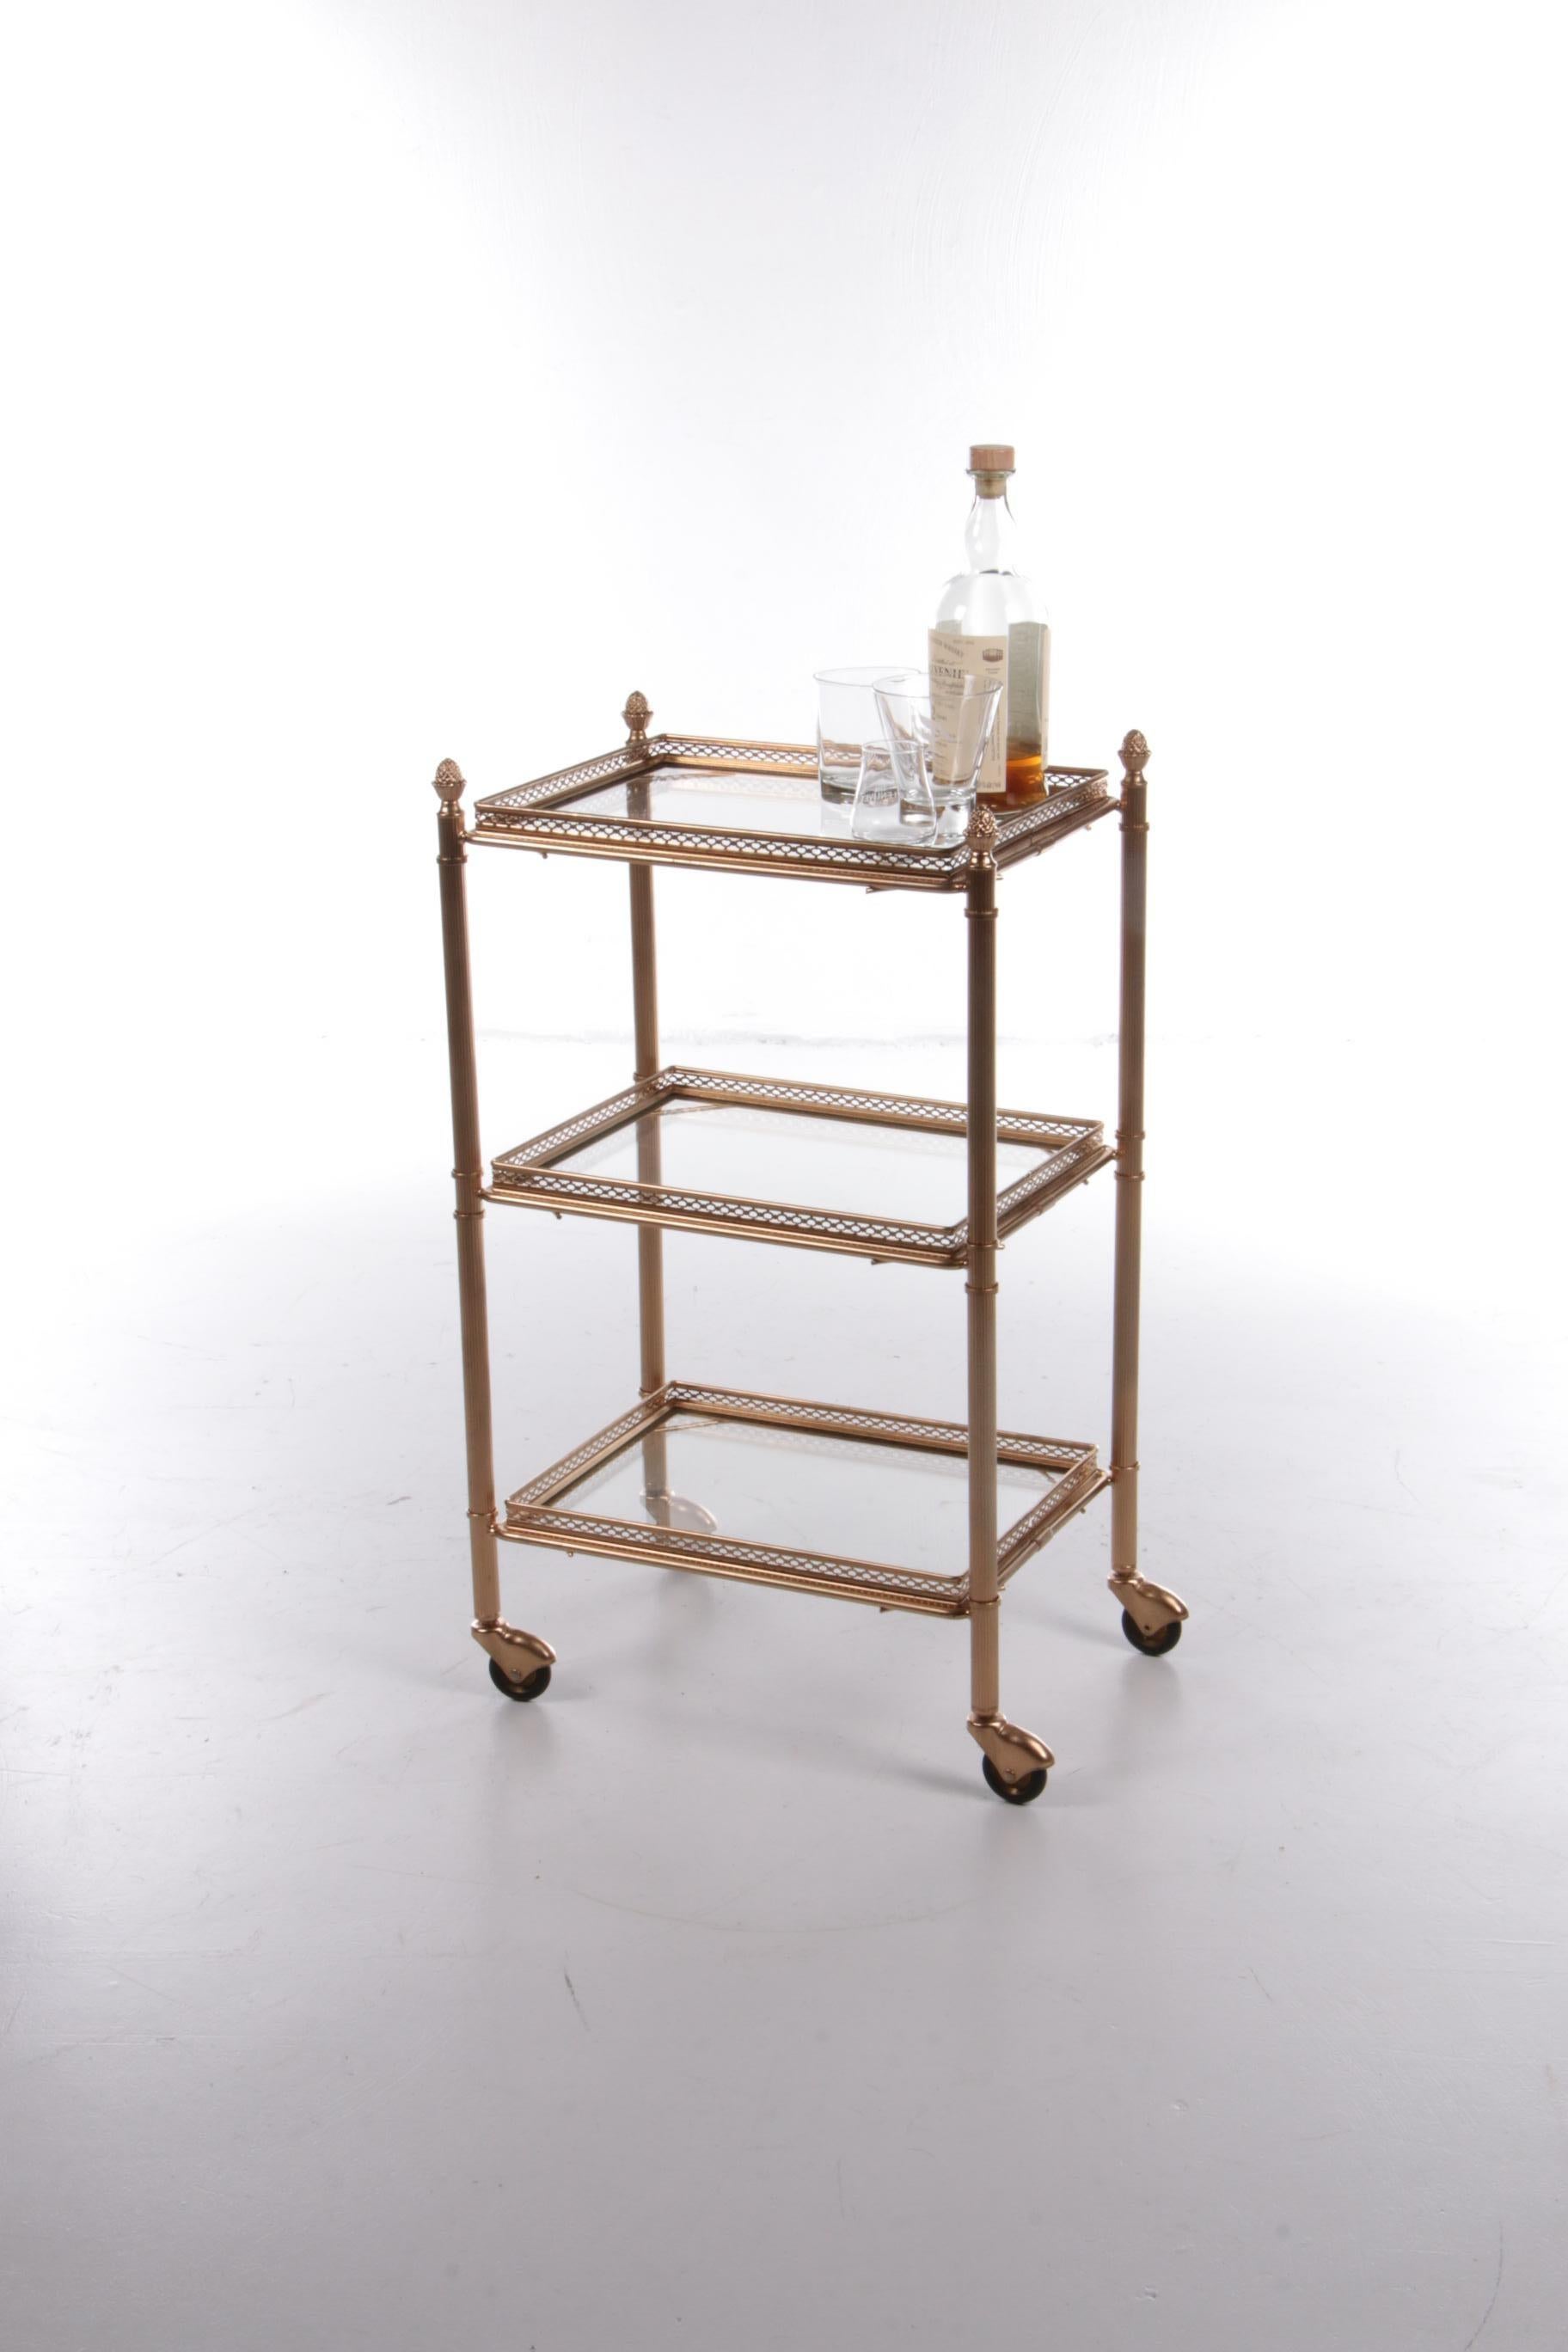 Brass serving trolley/tea trolley vintage with three layers.

Nice elongated shape with a brass frame and glass plates. The top and bottom trays are removable and can also be used as a tray.

Still in top condition, it still looks great for its